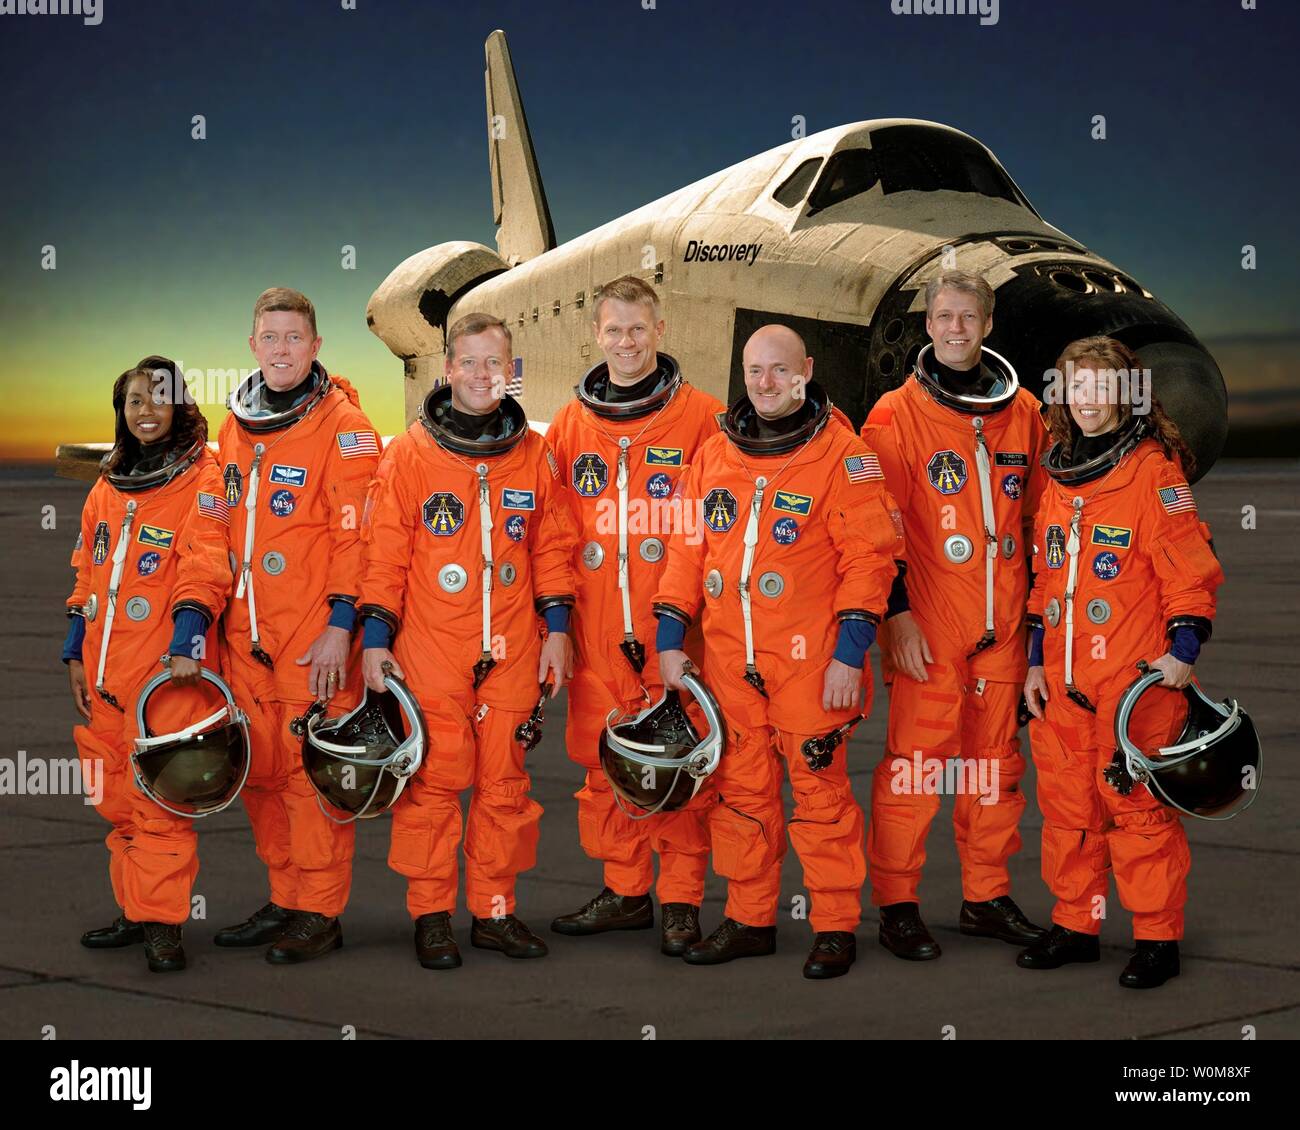 These seven astronauts take a break from training to pose for the STS-121 crew portrait on April 5, 2006. From the left are astronauts Stephanie D. Wilson, Michael E. Fossum, both mission specialists; Steven W. Lindsey, commander; Piers J. Sellers, mission specialist; Mark E. Kelly, pilot; European Space Agency astronaut Thomas Reiter of Germany; and Lisa M. Nowak, both mission specialists. (UPI Photo/NASA) Stock Photo